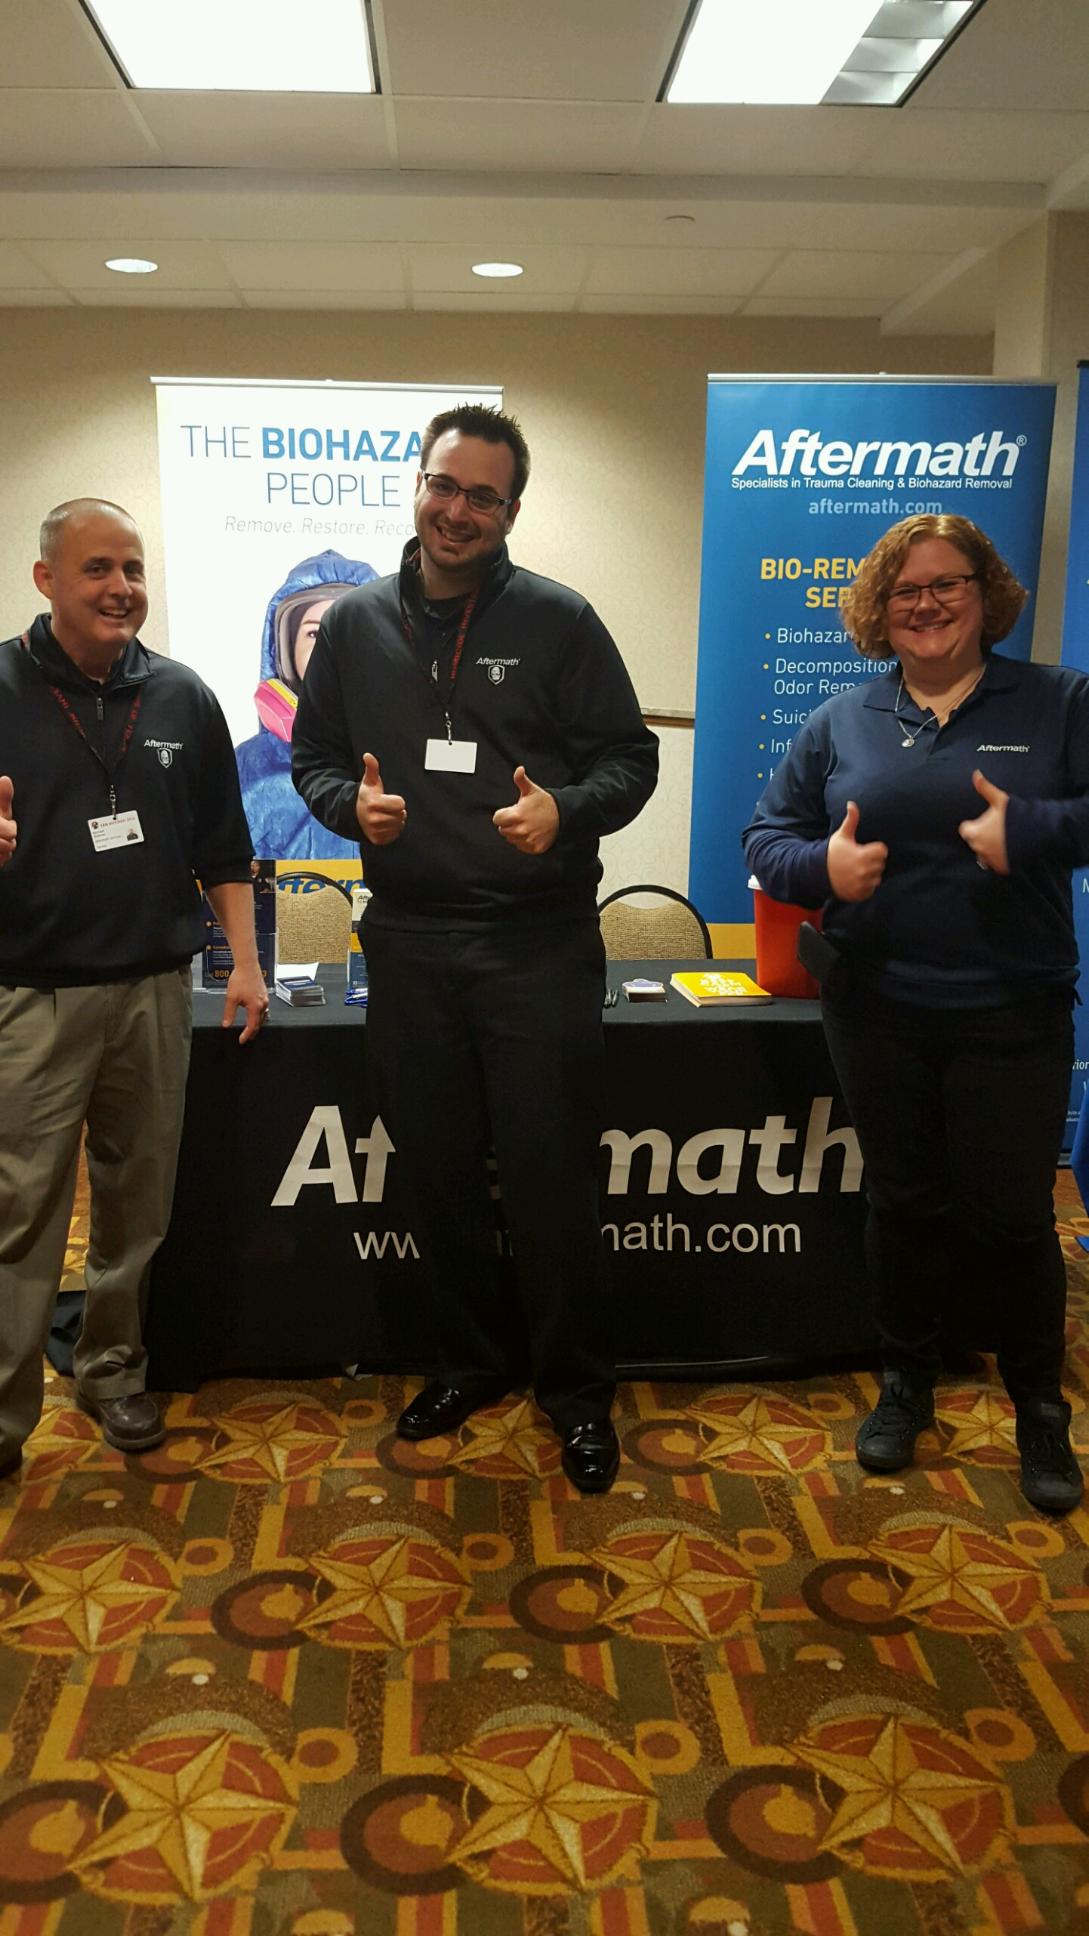 Aftermath booth at 2016 HITX Police Training Conf.